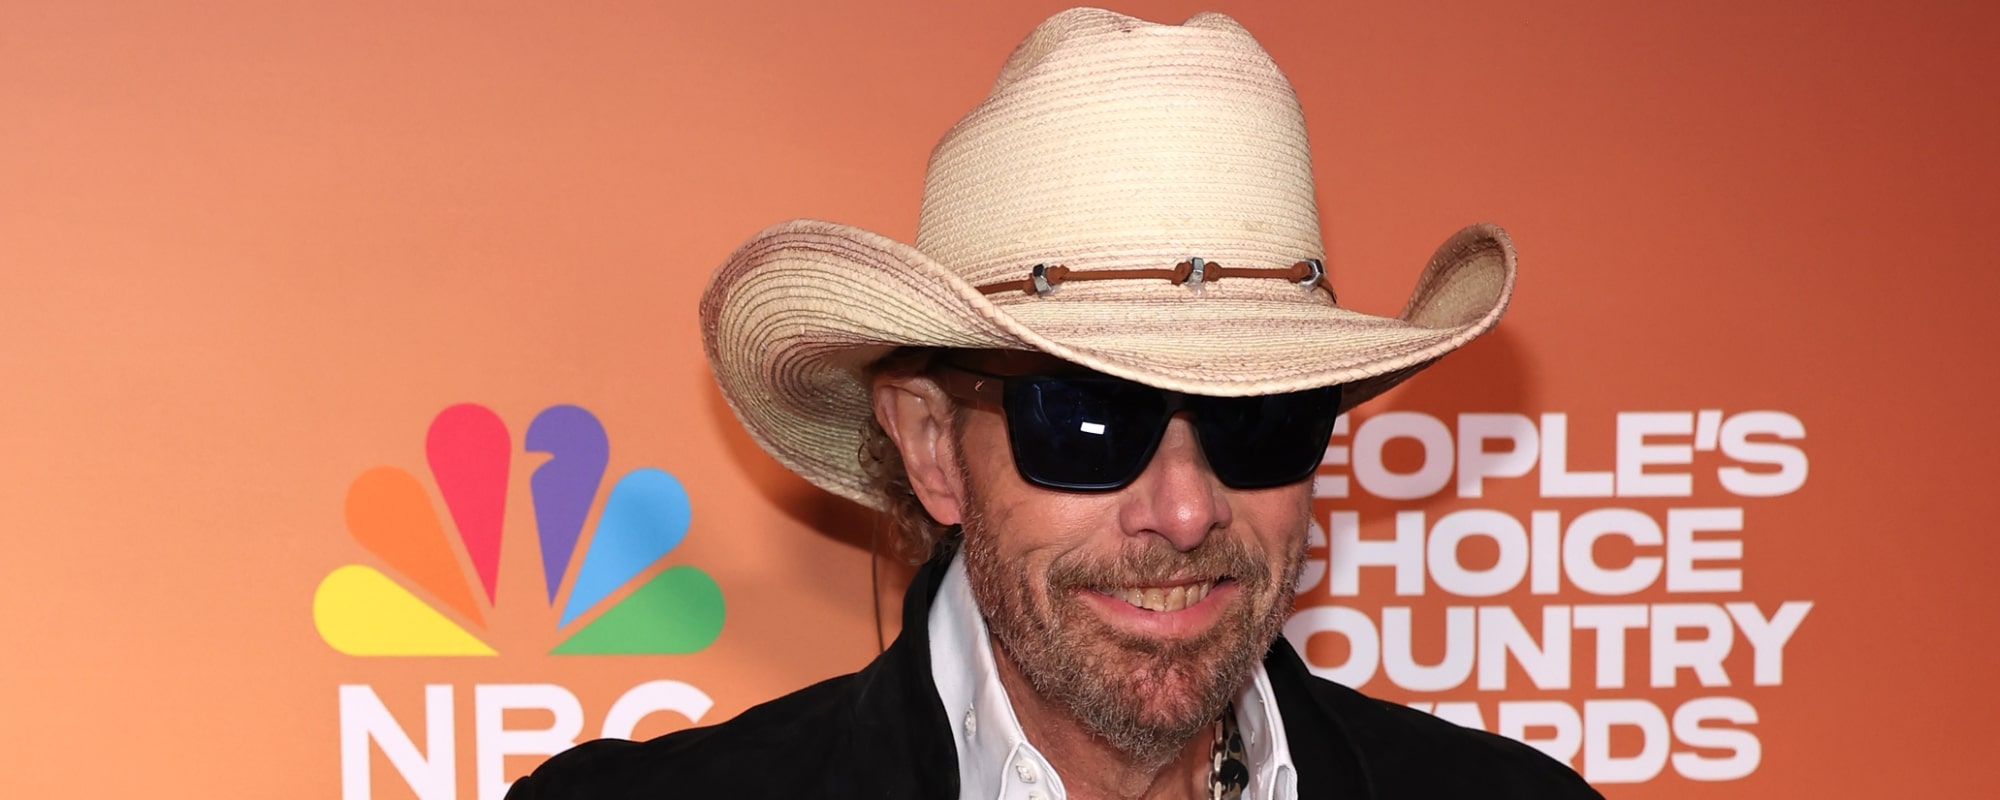 Watch Toby Keith Belt “Courtesy of the Red, White, and Blue” in the Backseat of an Uber